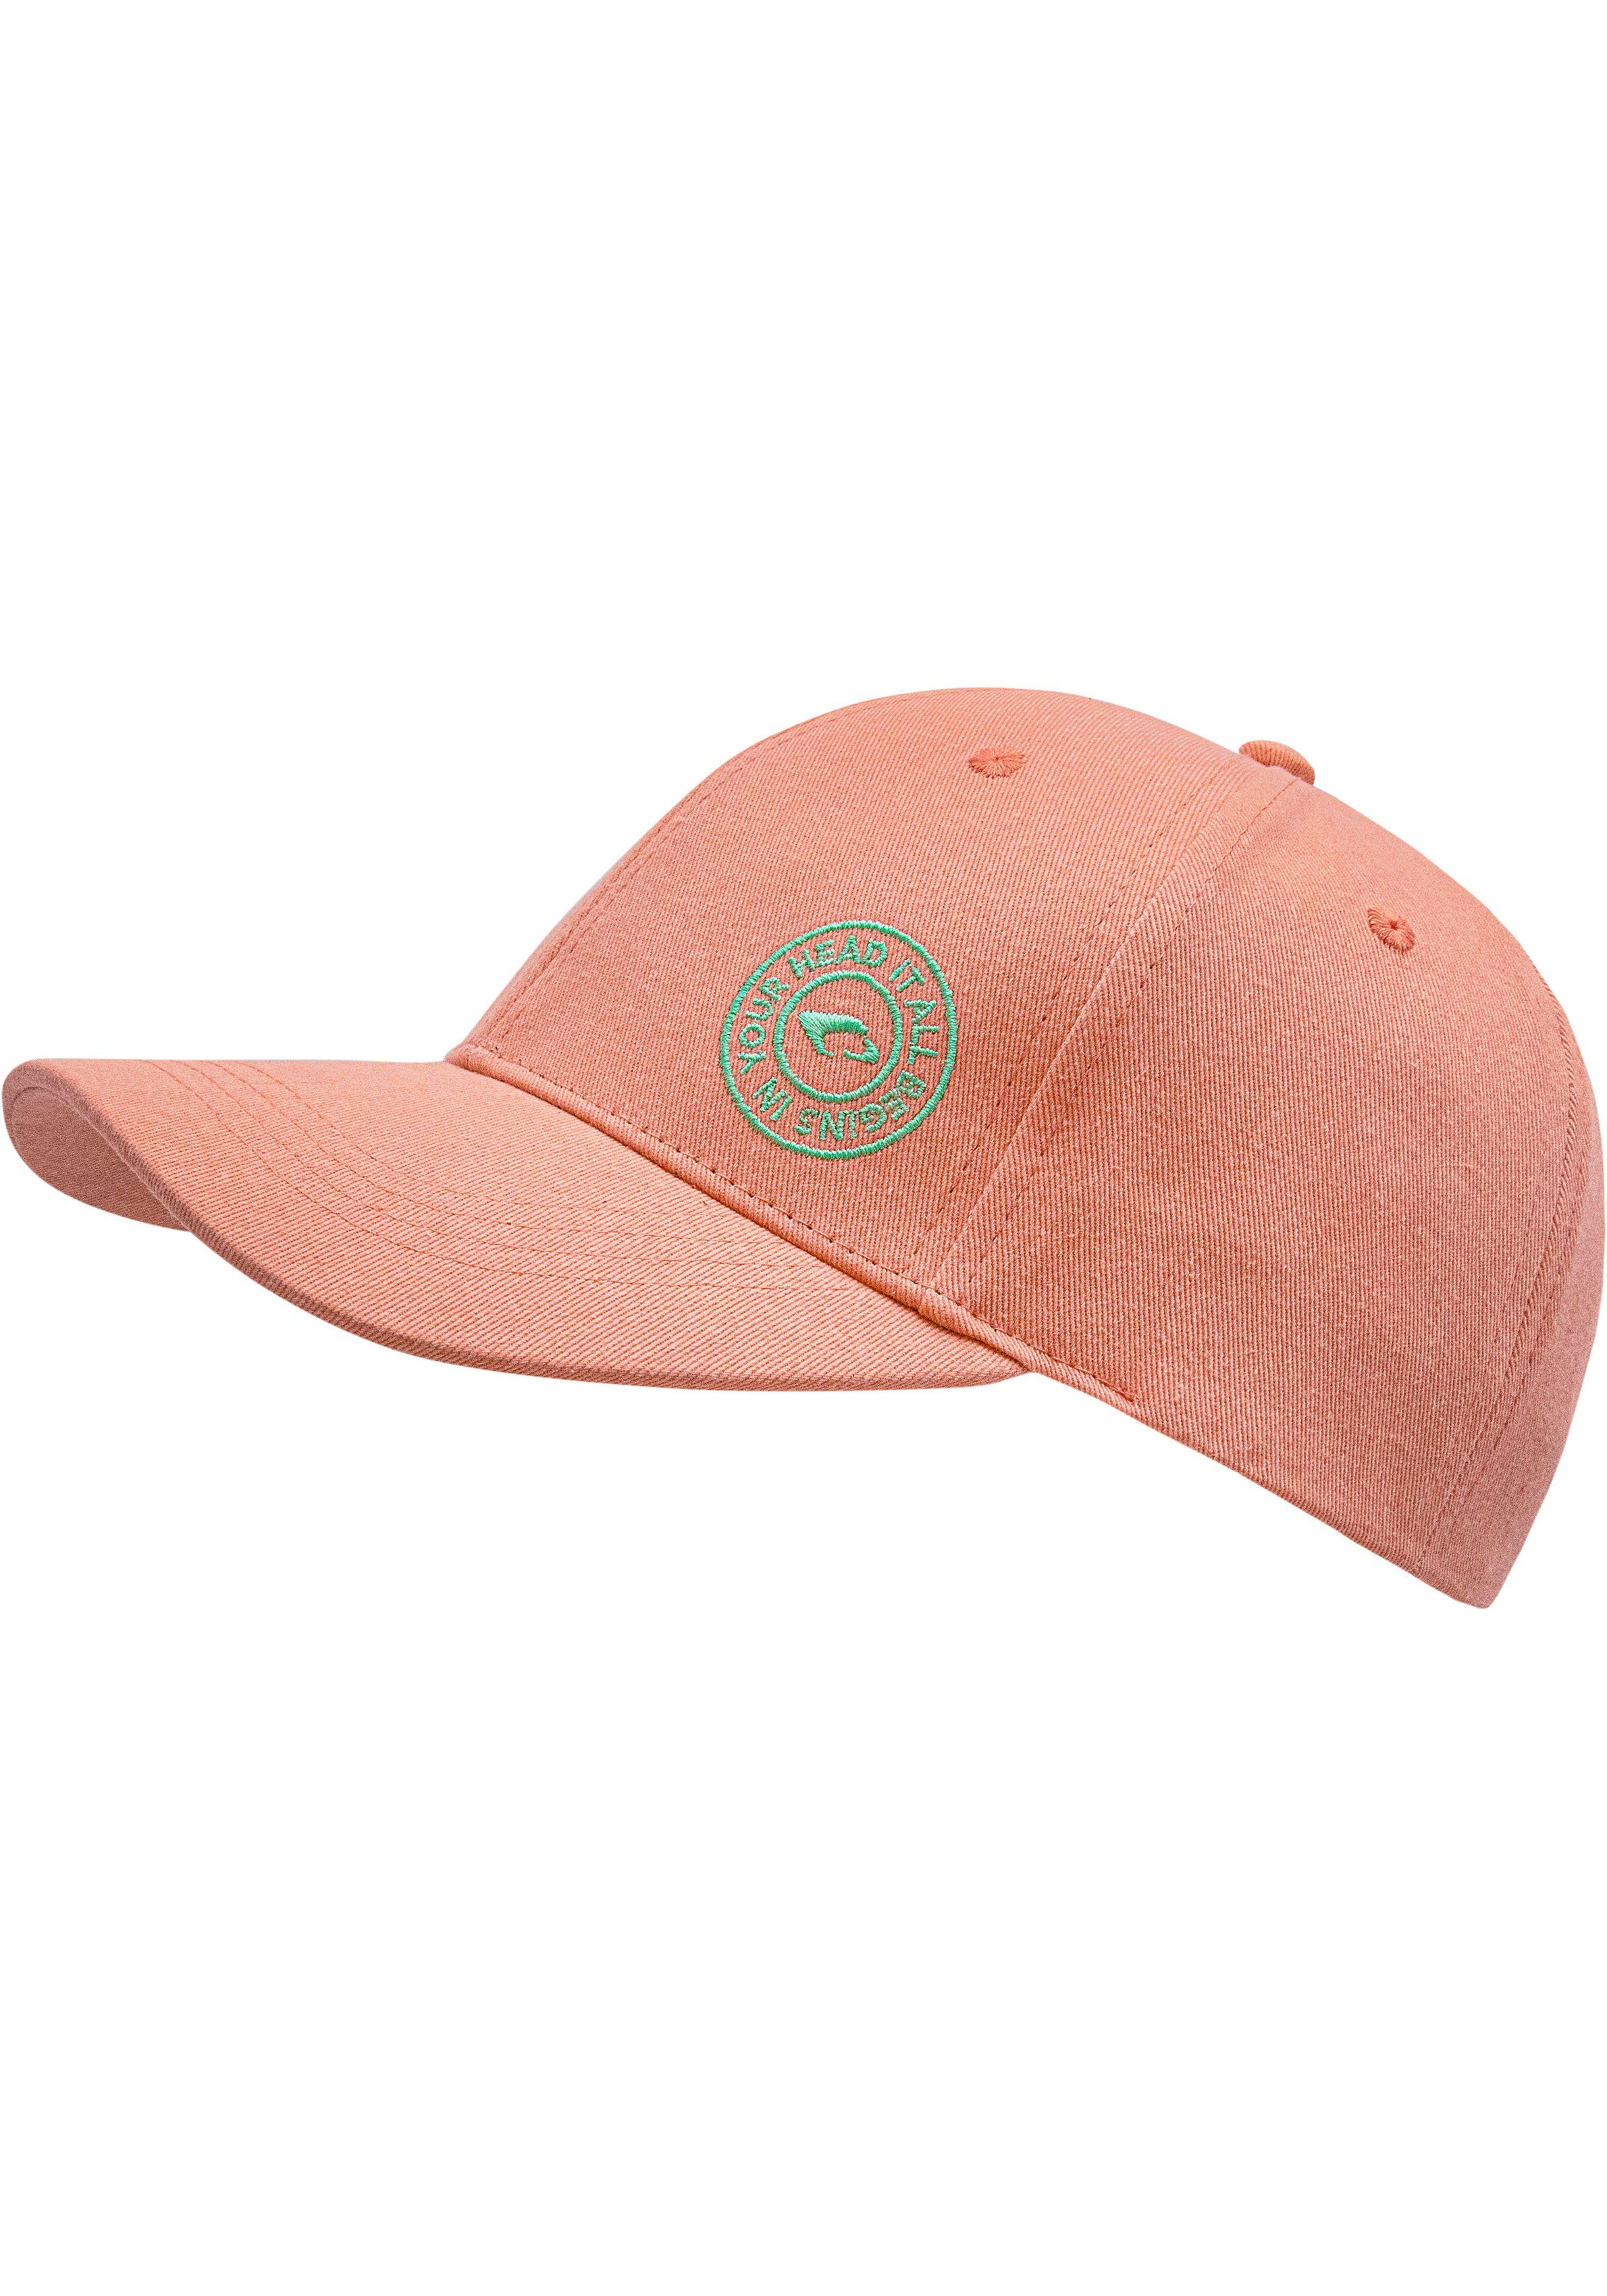 chillouts Baseball Hat Cap Arklow coral